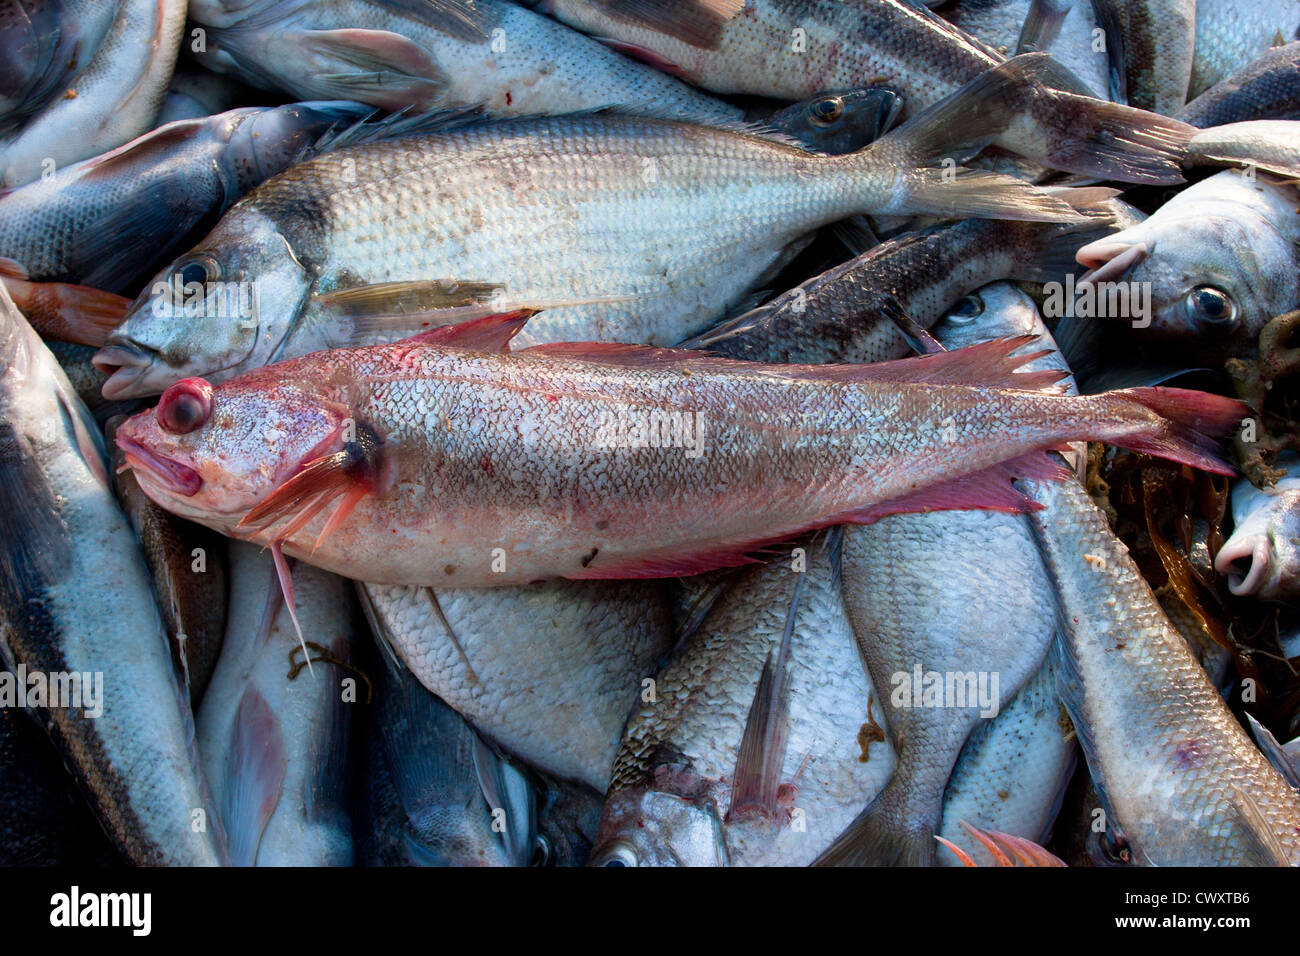 Haul from trawl net on a commercial fishing trawler: Red Cod and Tarakihi. Stock Photo